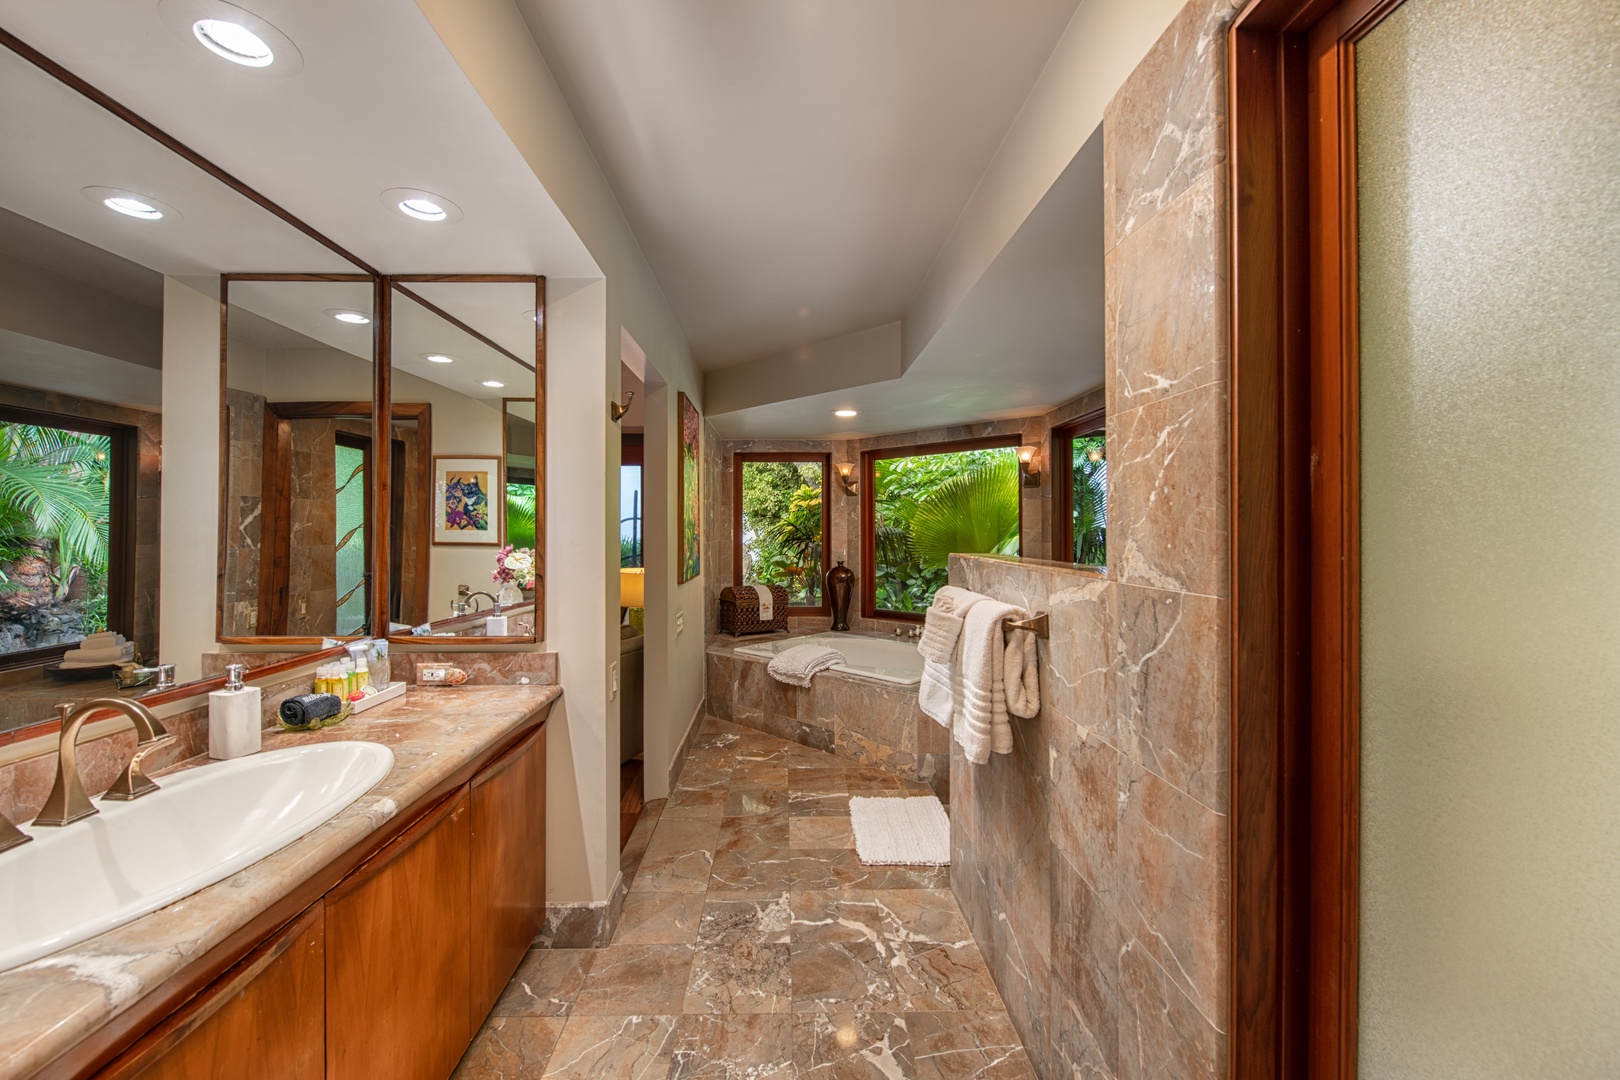 Kailua Kona Vacation Rentals, Hale Wailele** - The primary ensuite is expansive and welcoming